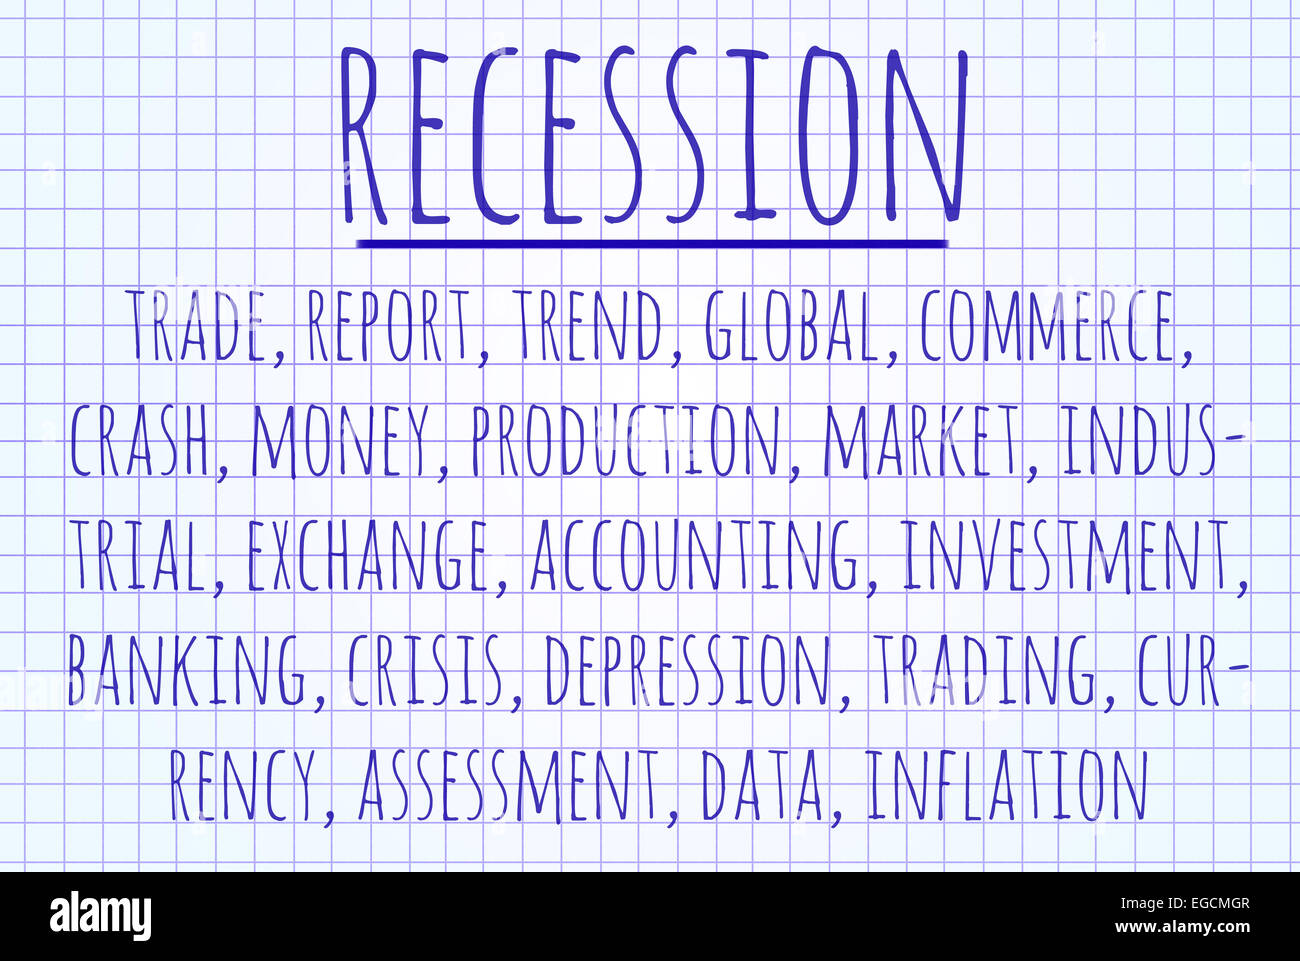 Recession word cloud written on a piece of paper Stock Photo